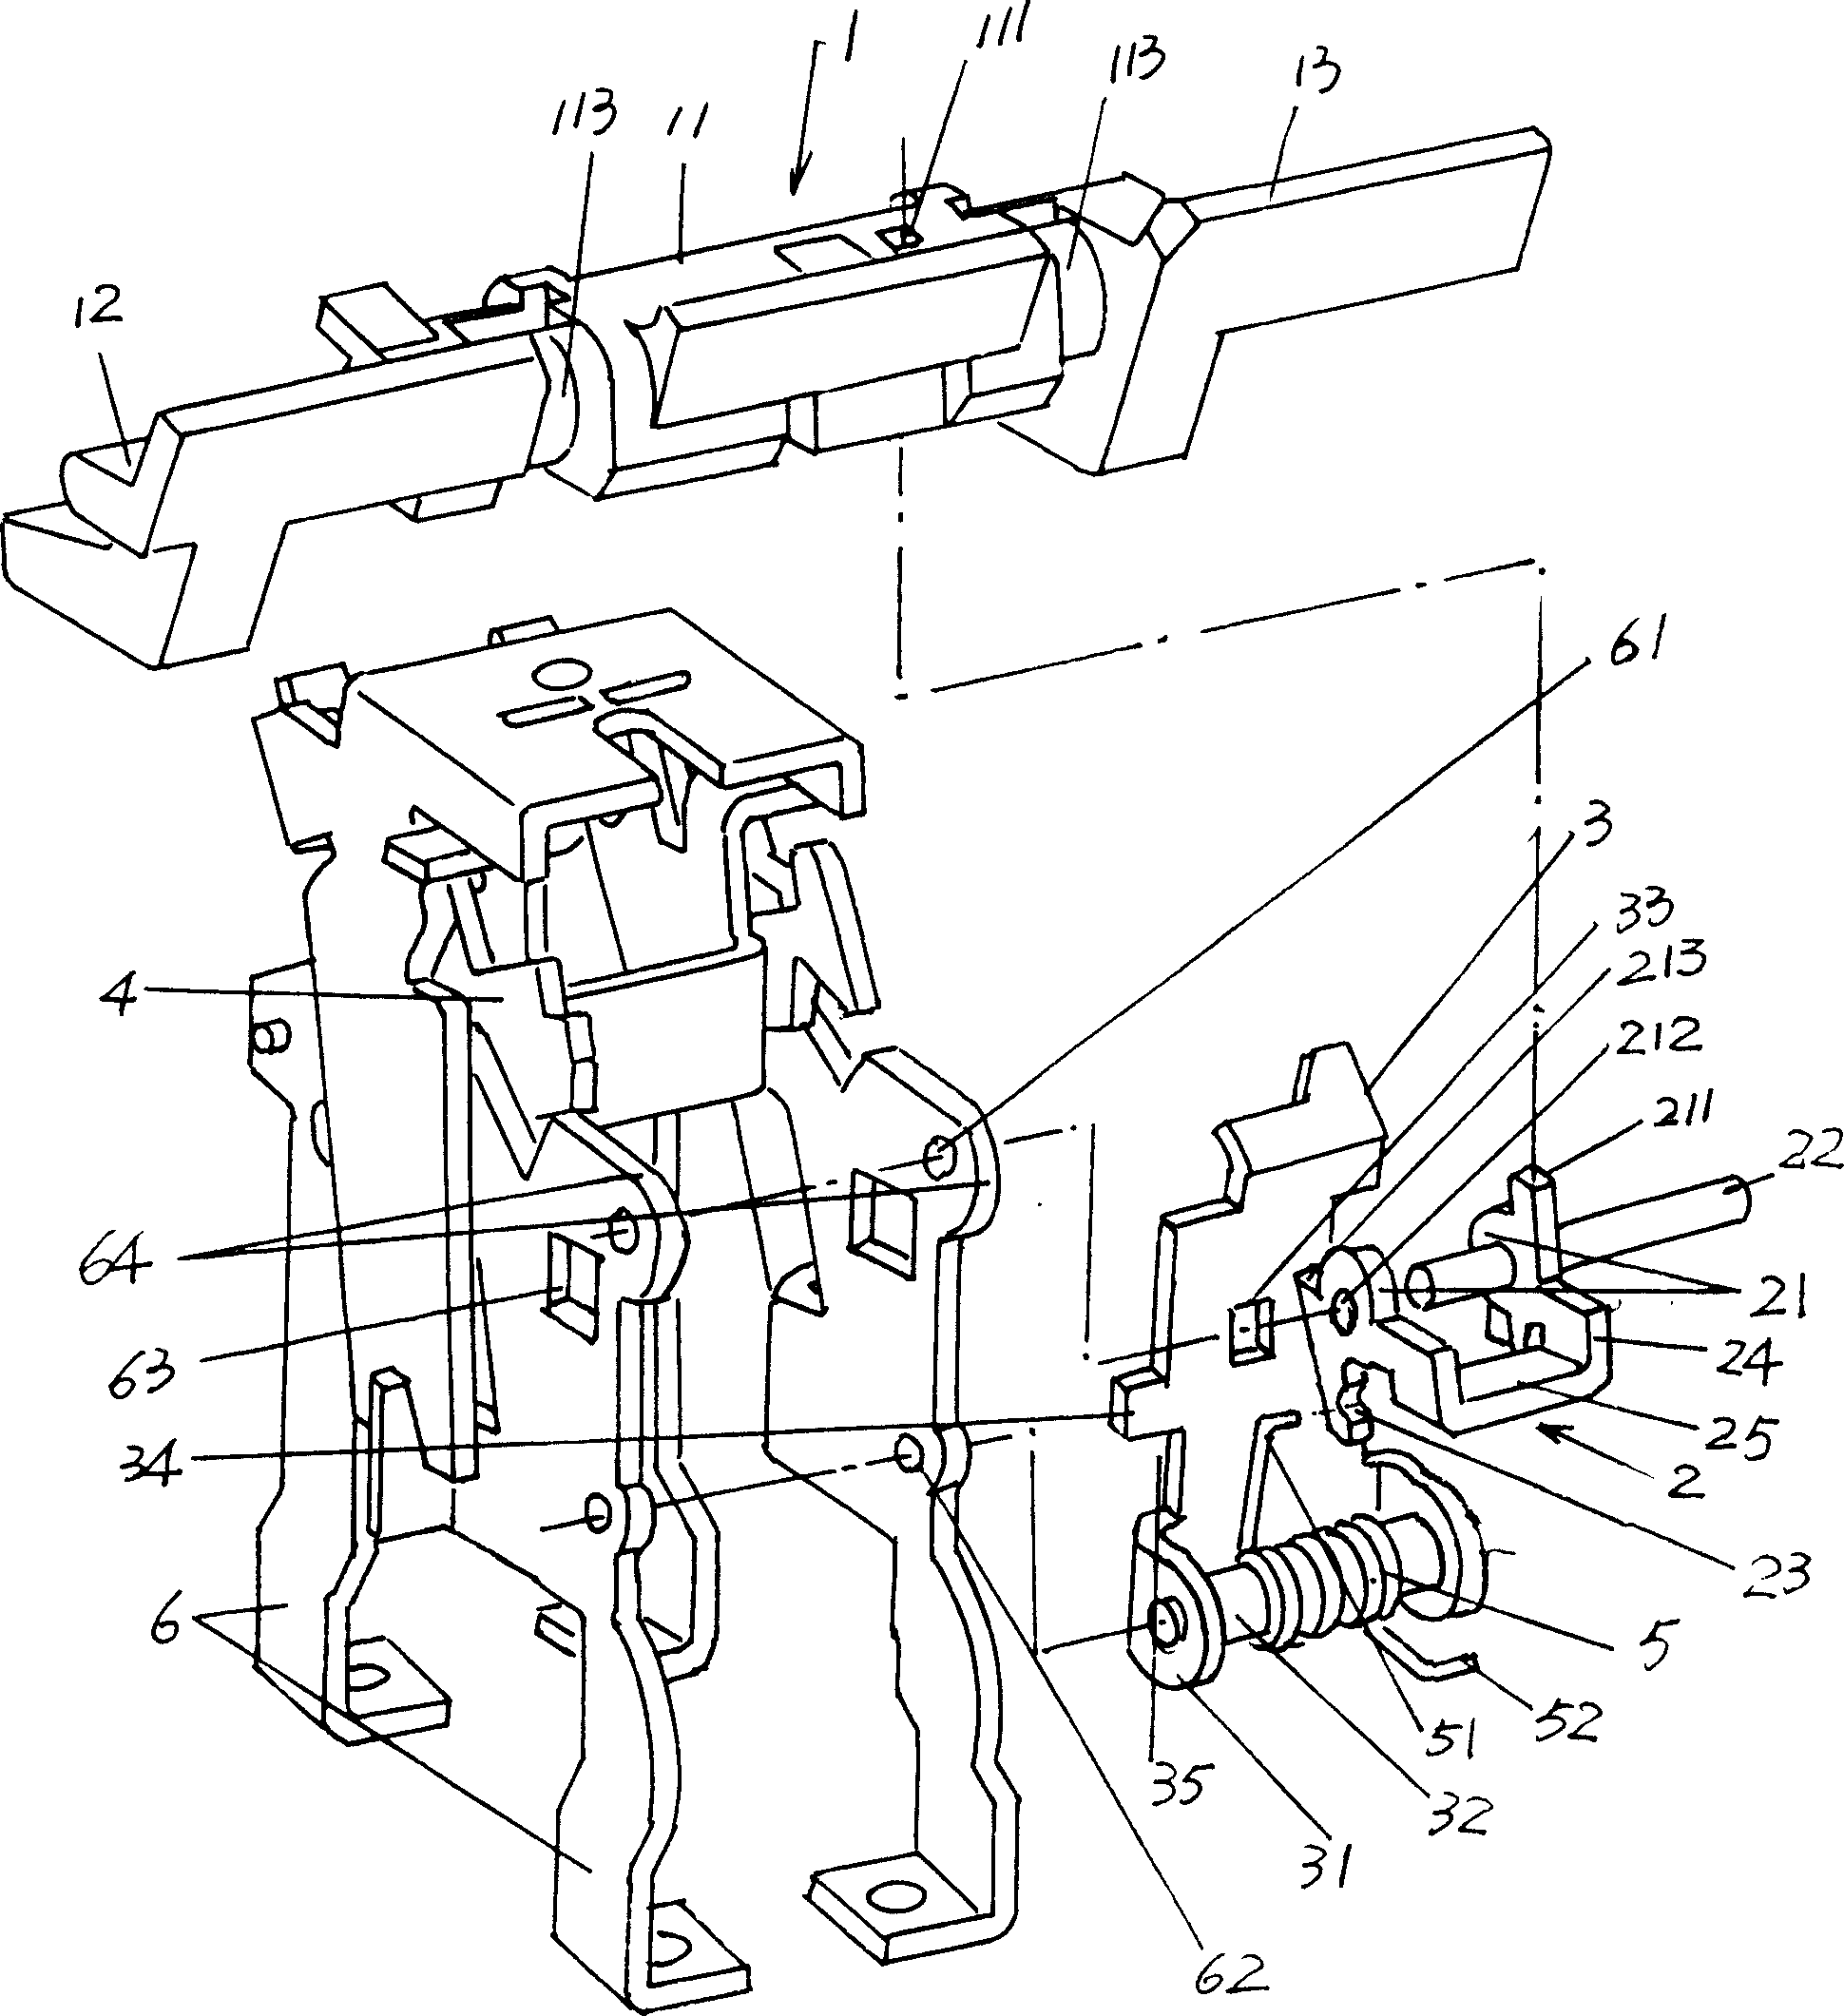 Tripping device for breaker operation mechanism